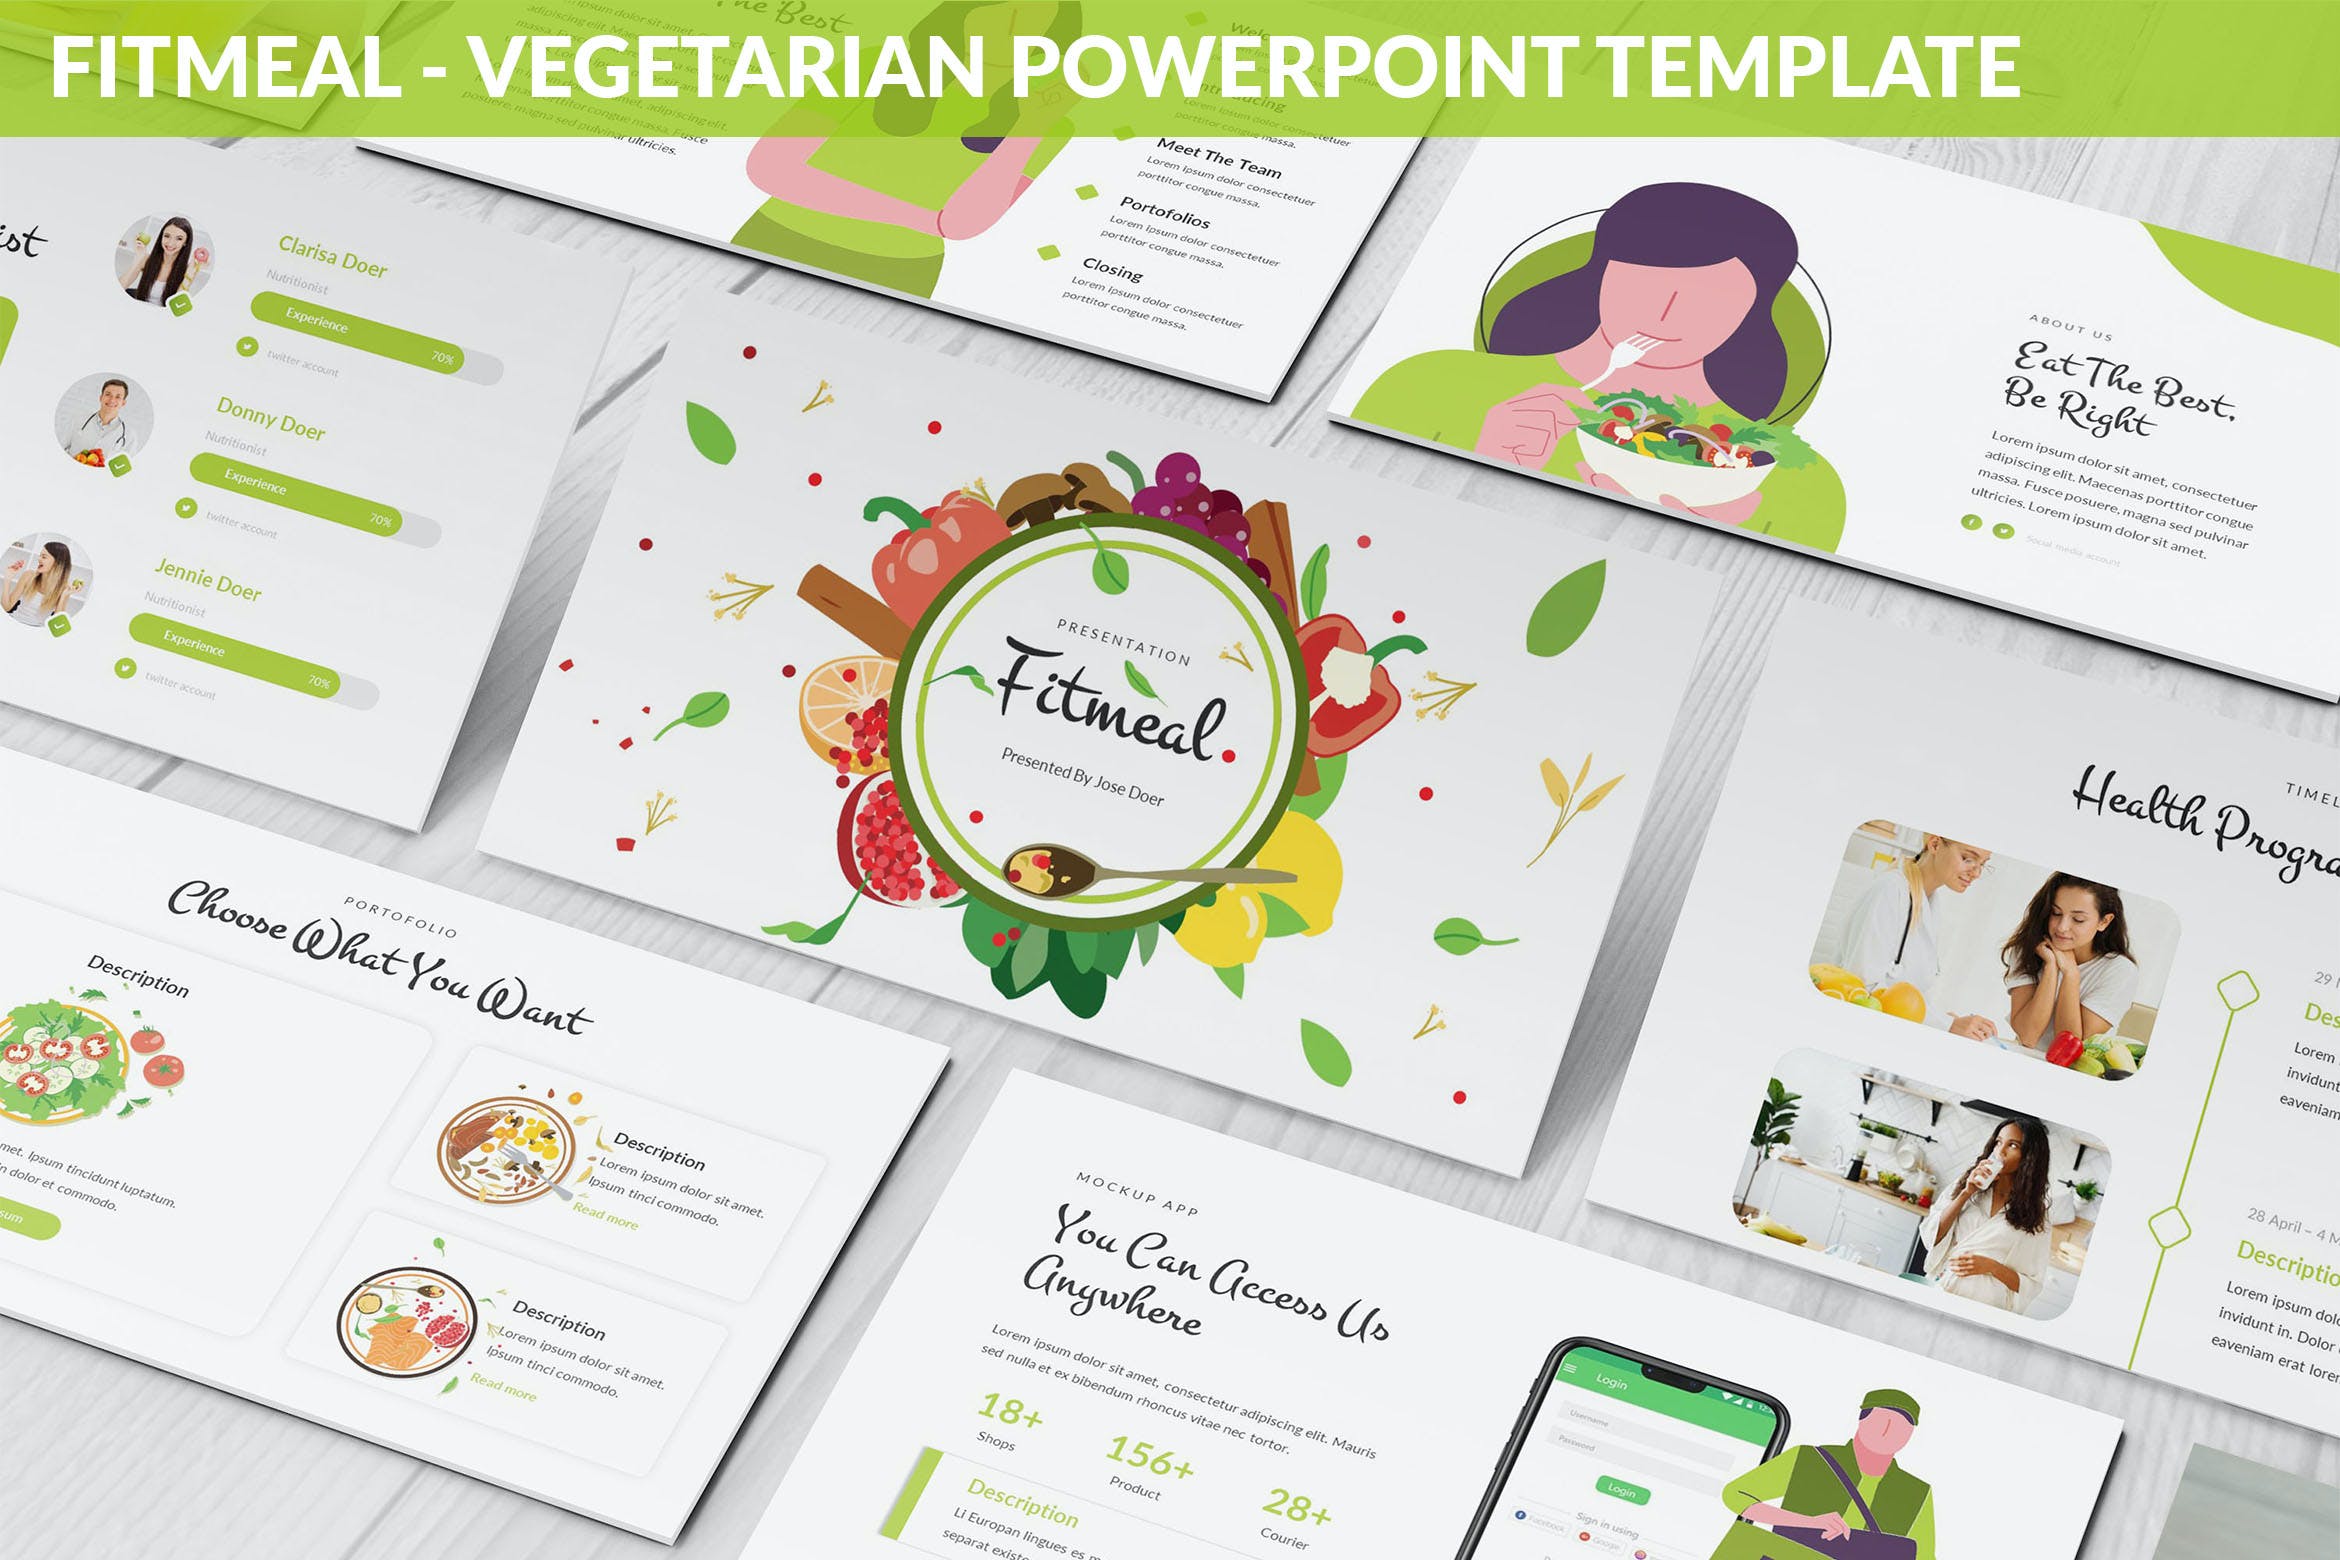 Cover image of Fitmeal Vegetarian Powerpoint Template.